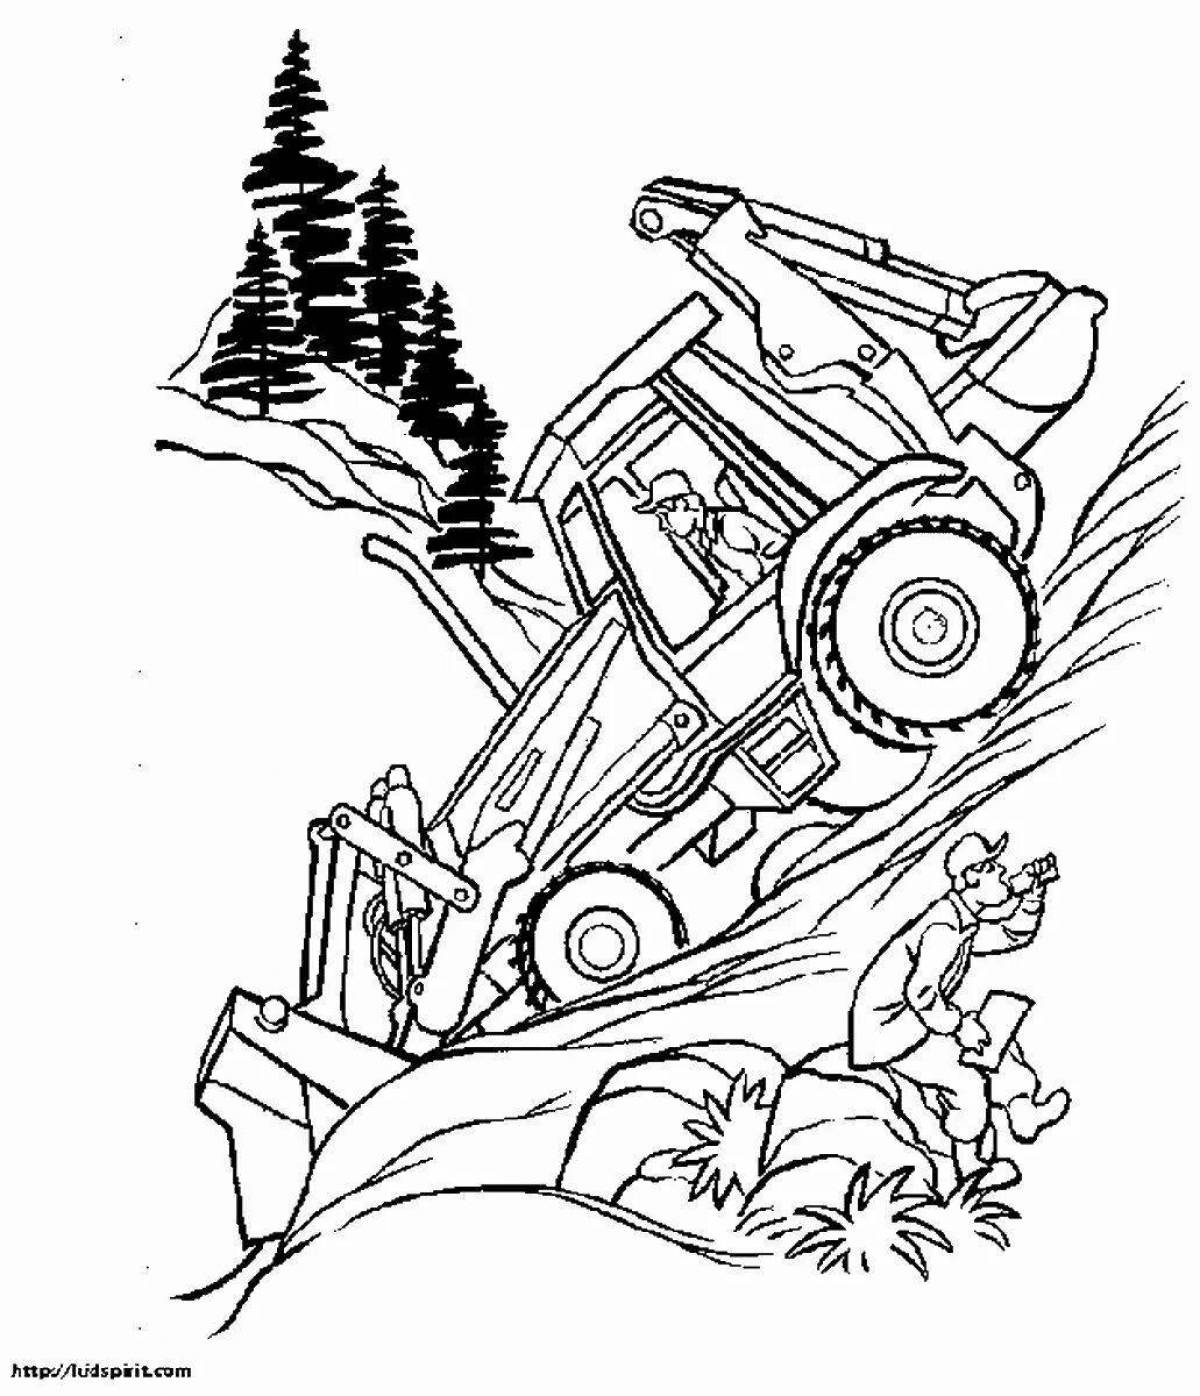 Coloring page amazing snowplow